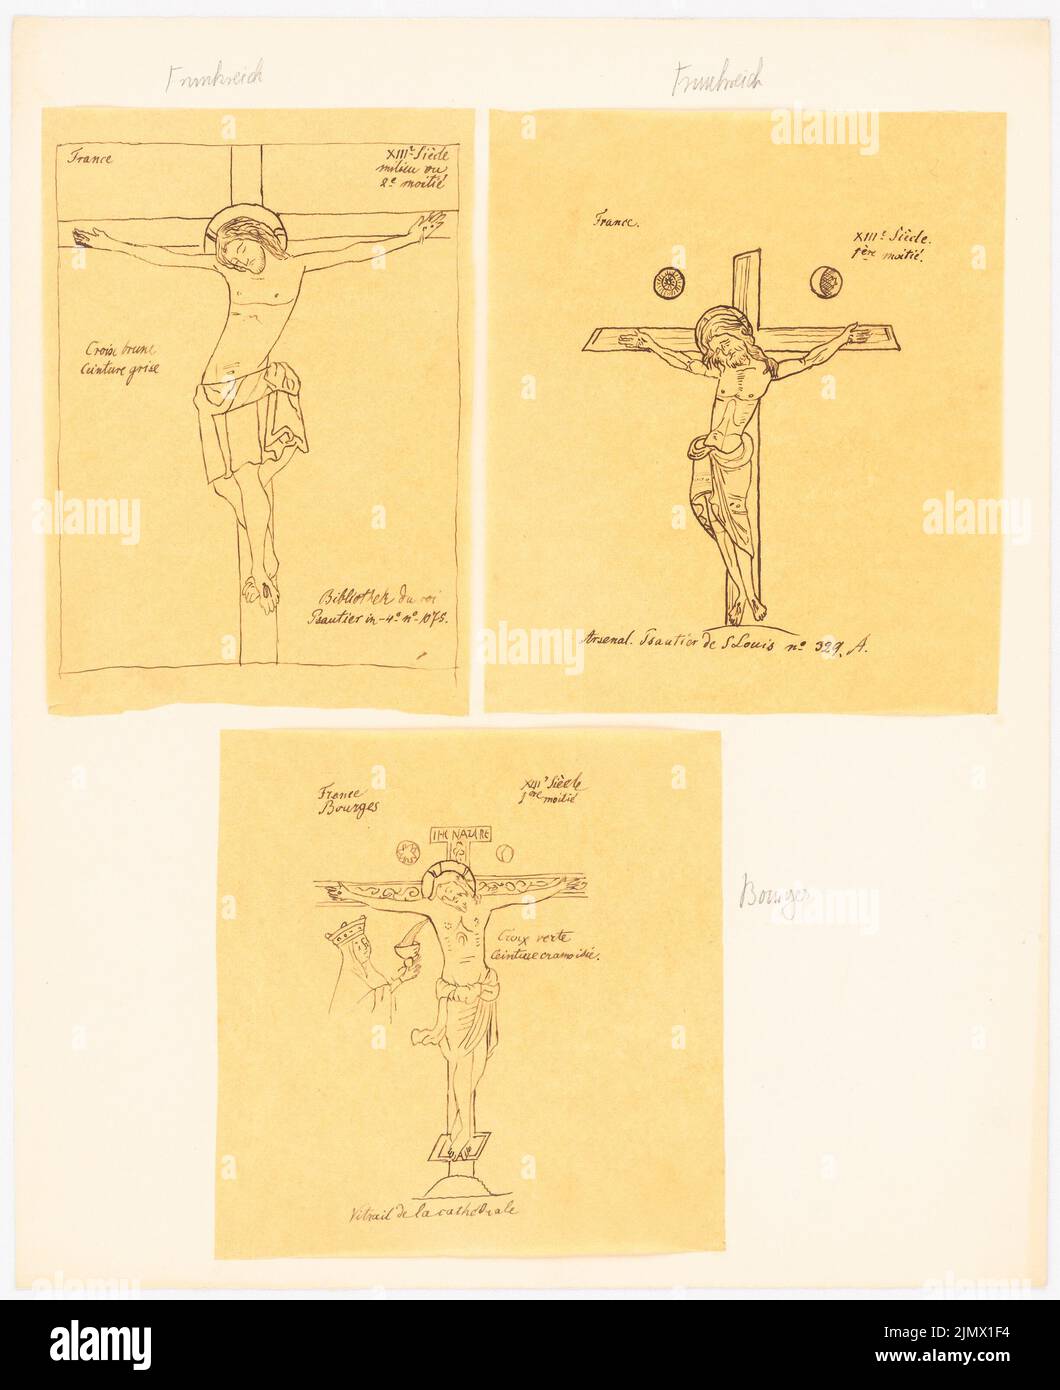 Quast Ferdinand von (1807-1877), crucifixes from the 13th century from the cathedral in Bourges and two psaters from libraries in Paris (without dat.): Three views, including the green cross from Bourges (after or through drawings from the Psantier in 4E, no. 1075 in the Bibliothèque du Roi and from the ink on transparent, 35.6 x 29 cm (including scan edges) Quast Ferdinand von  (1807-1877): Kruzifixe aus dem 13. Jh. aus der Kathedrale, Bourges und zwei Psaltern aus Bibliotheken, Paris Stock Photo